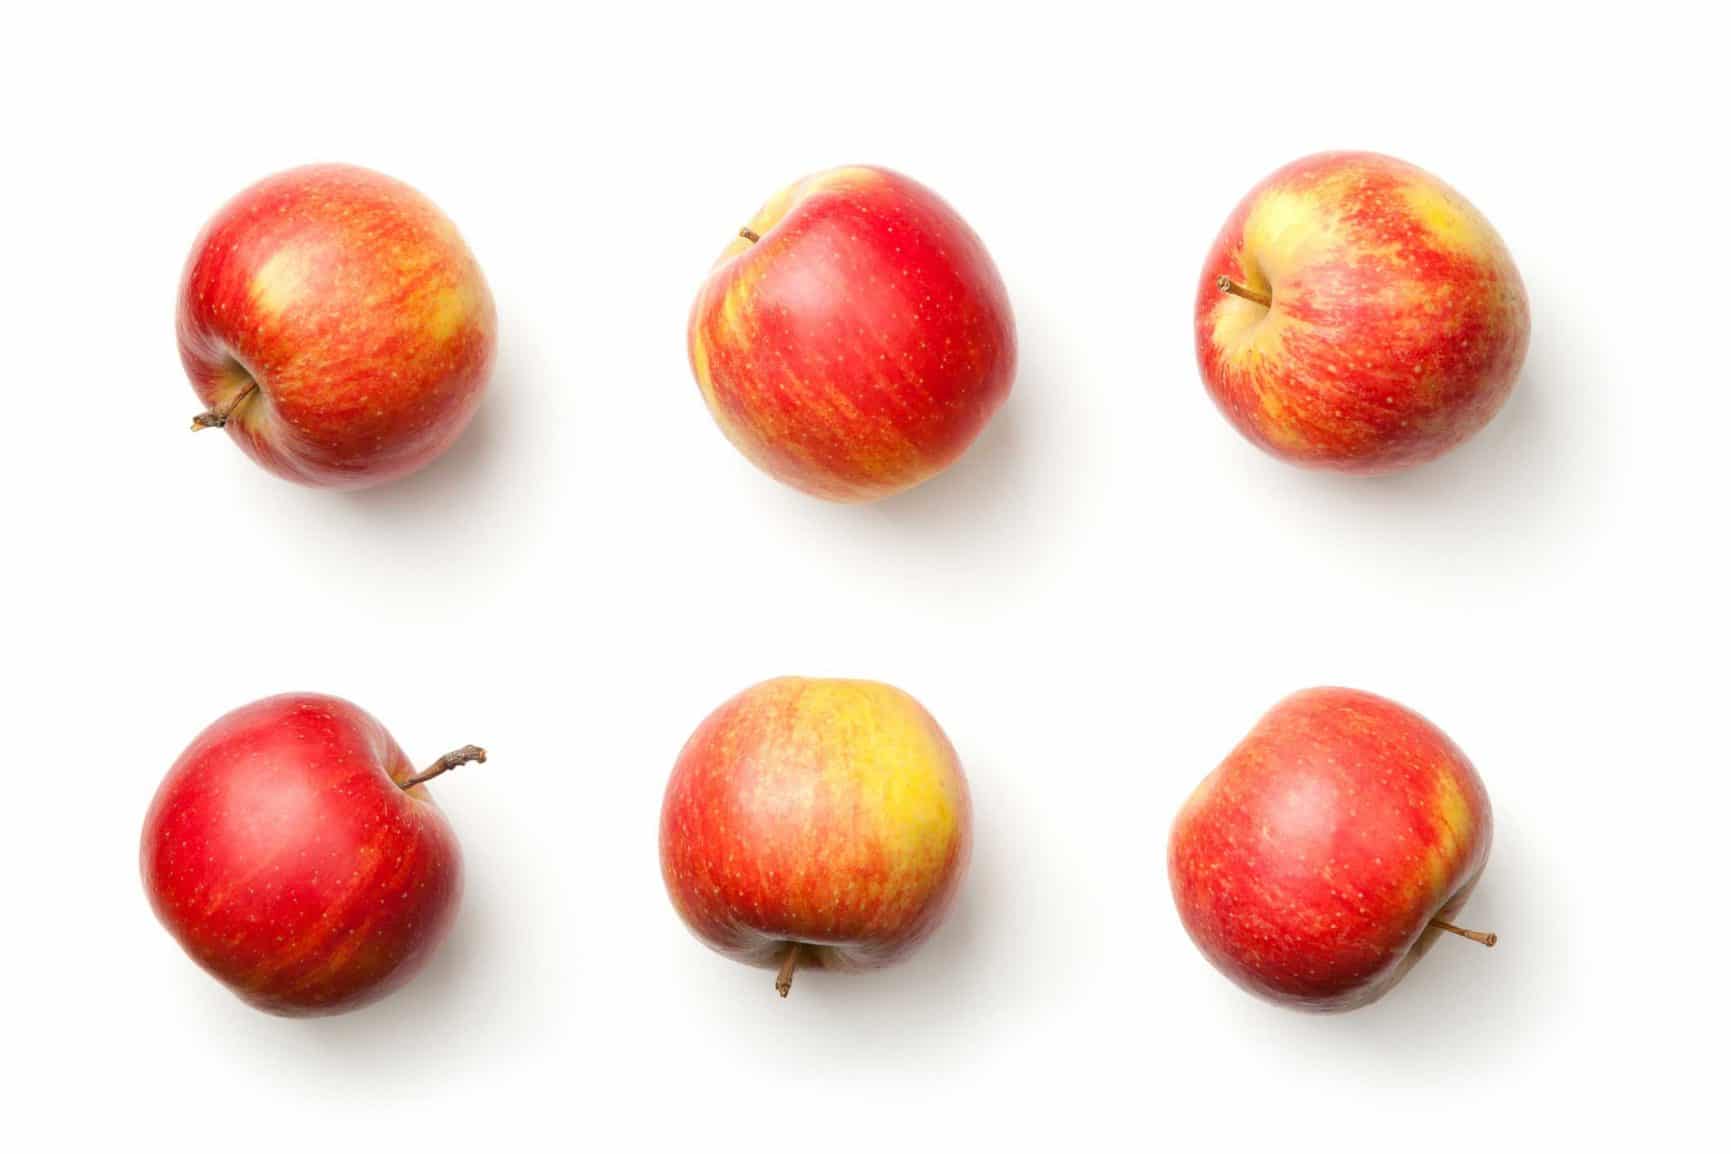 https://naturallysavvy.com/wp-content/uploads/2018/11/How-Fresh-Are-Your-Supermarket-Apples.jpg